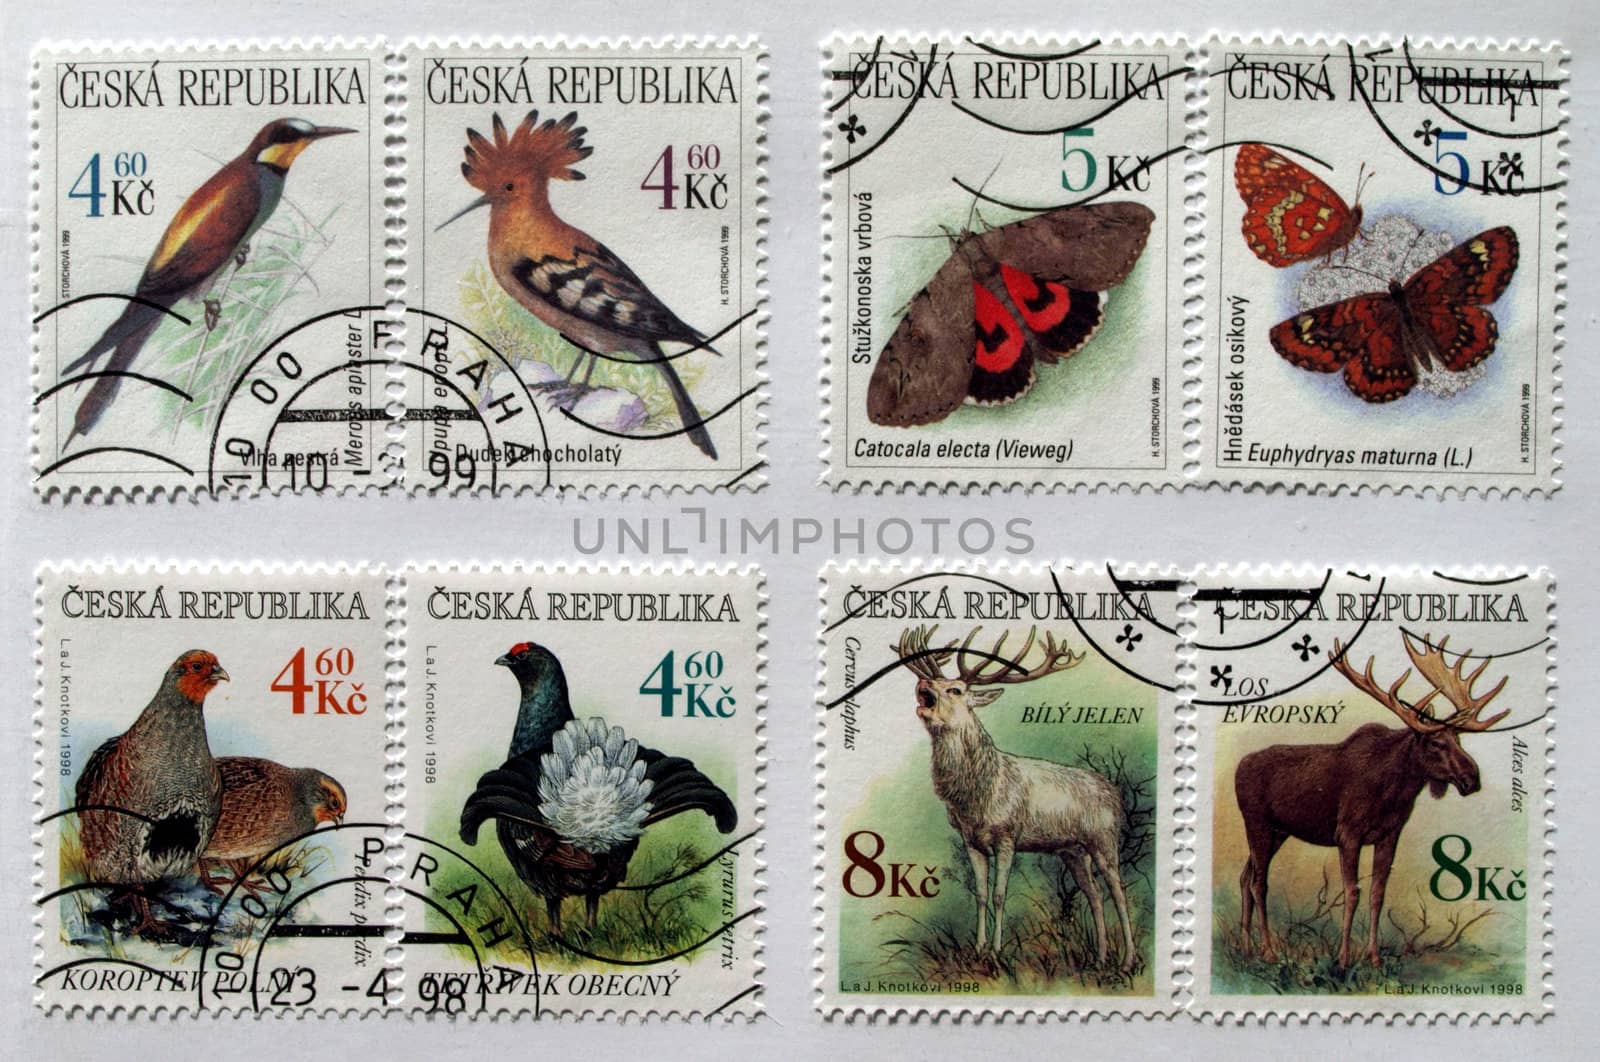 Czech Republic mail postage stamps with animals (deer, moose, butterfly, birds)